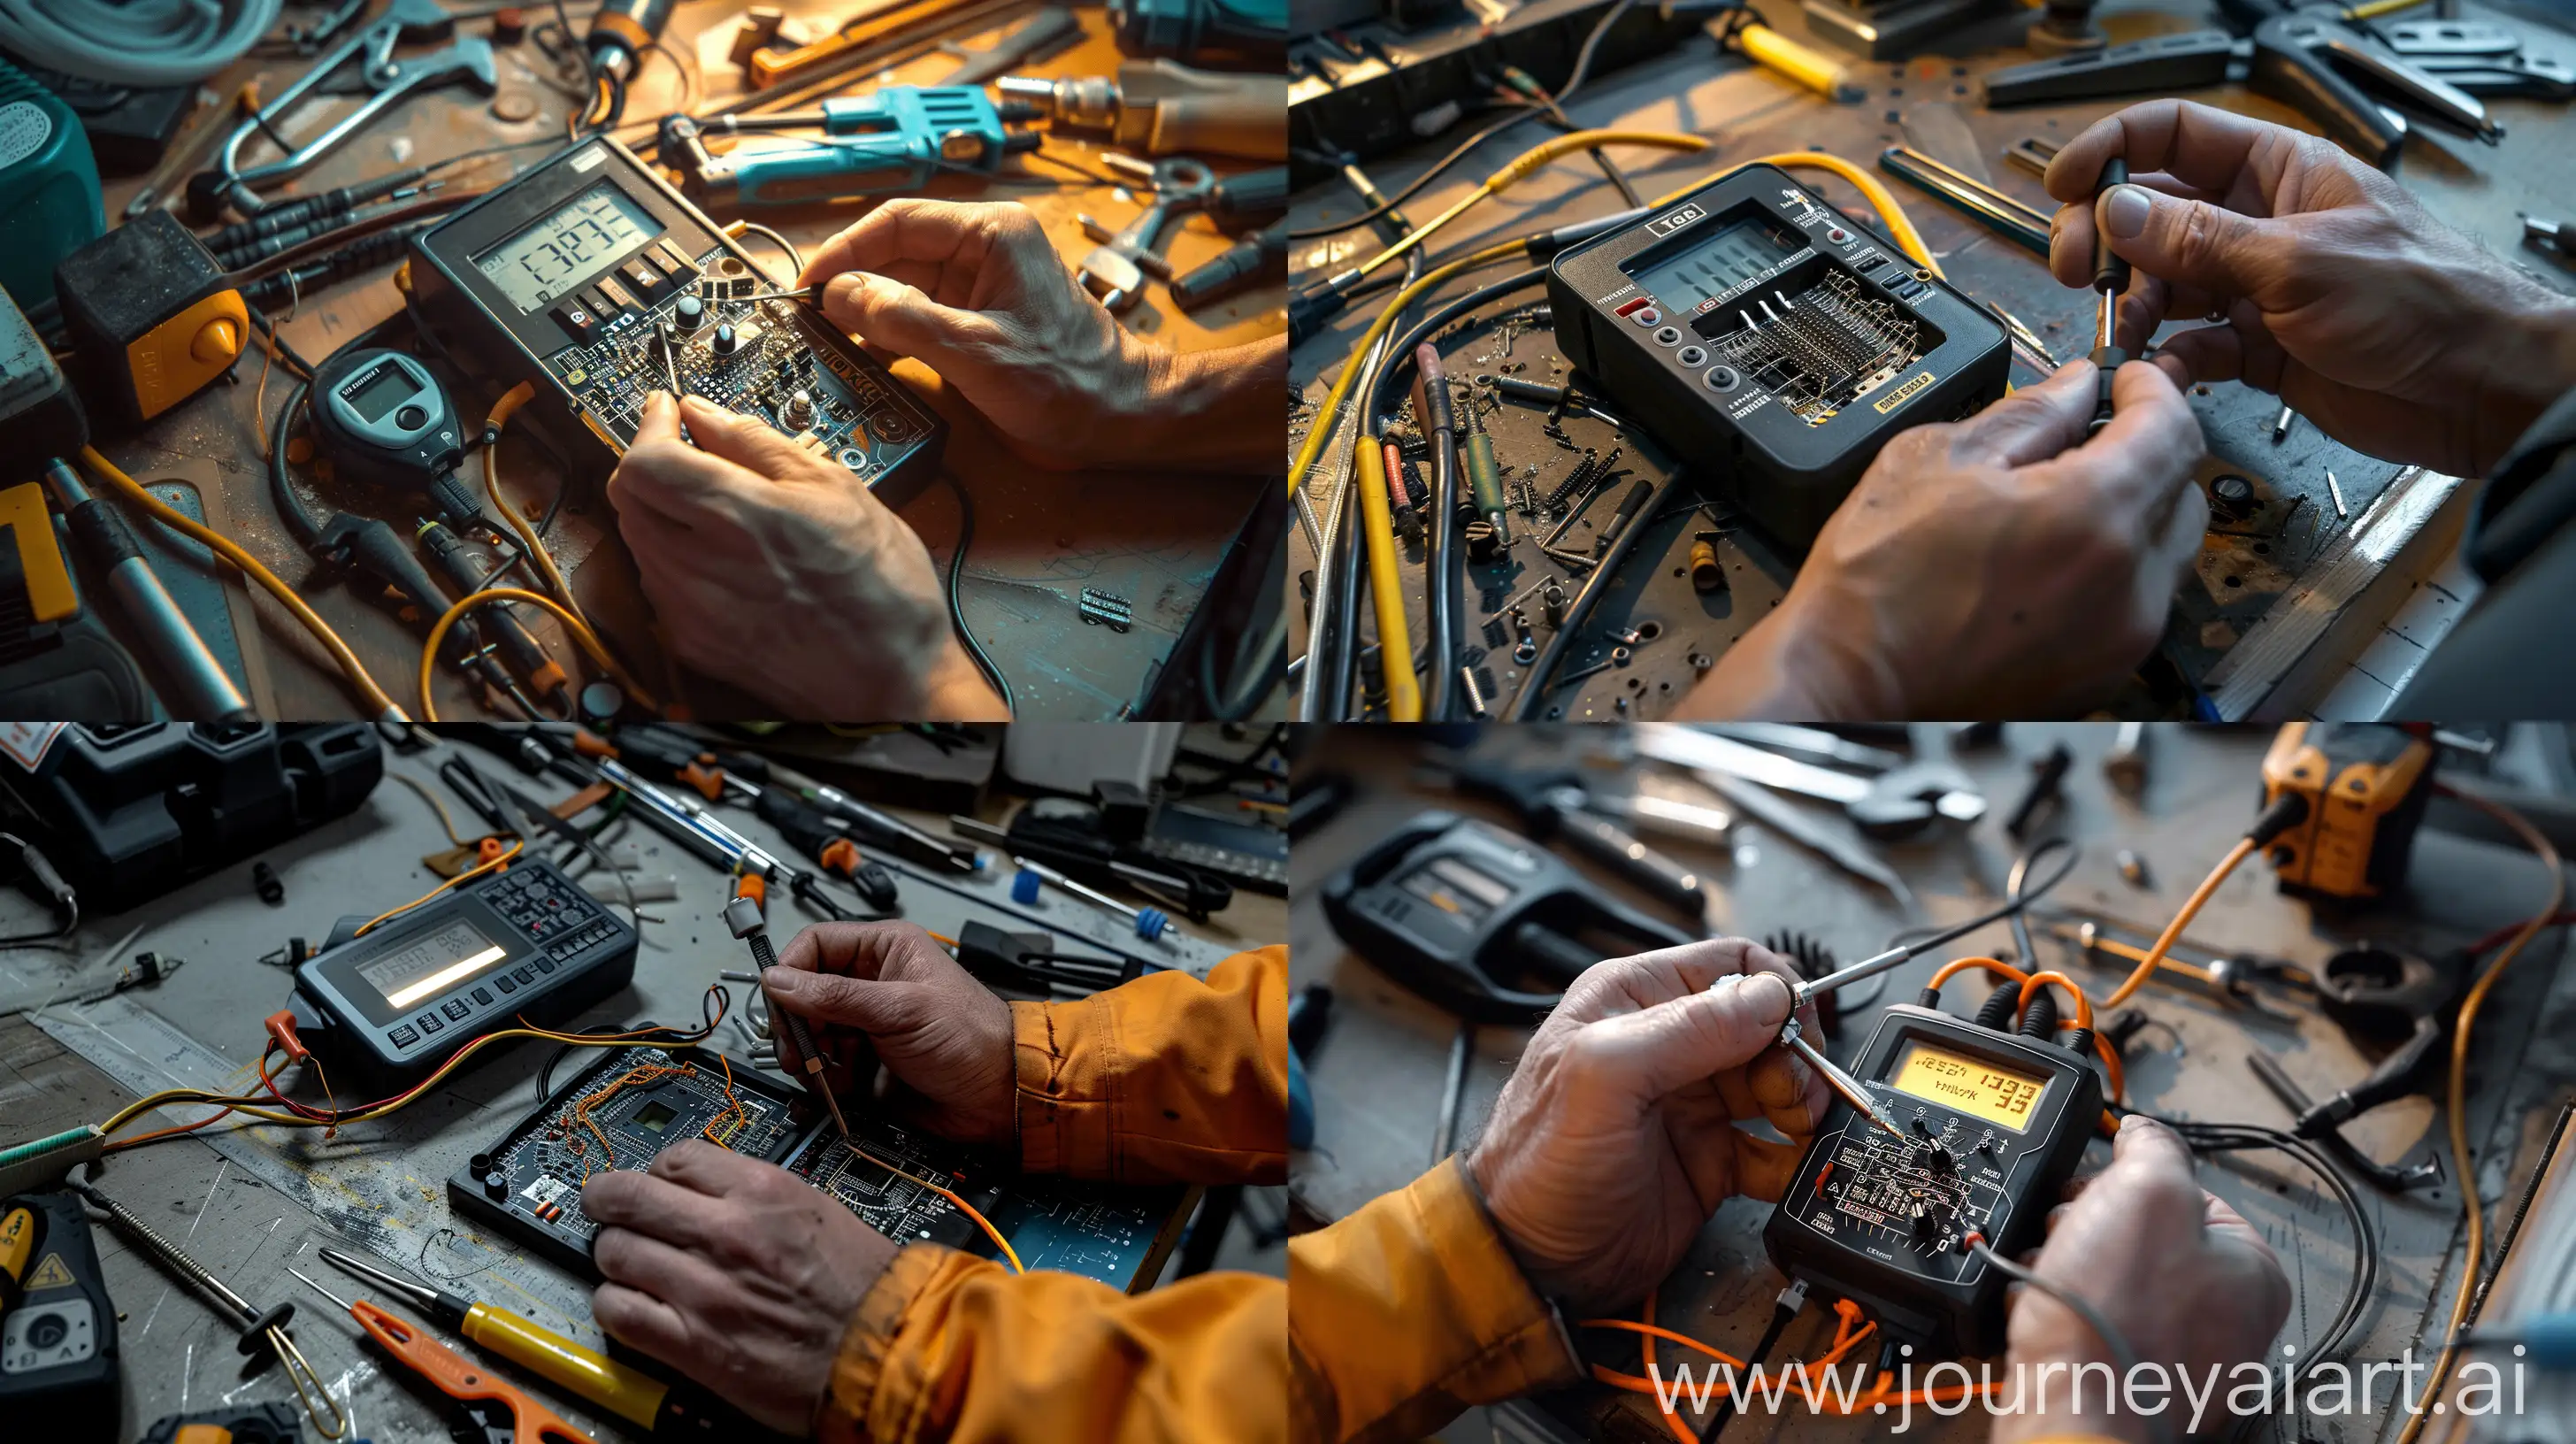 A detailed photograph depicts the process of testing a heating element (тэн) using a multimeter. A technician's hands are shown holding the multimeter probes while examining the components of the heating element. The scene is set on a workbench, with tools and equipment scattered around, indicating a workshop environment. The multimeter's display screen is visible, showcasing the readings obtained during the test. Lighting is focused on the technician's hands and the heating element, ensuring clear visibility of the testing process. The composition highlights the precision and attention to detail required for testing the heating element accurately.  --ar 16:9 